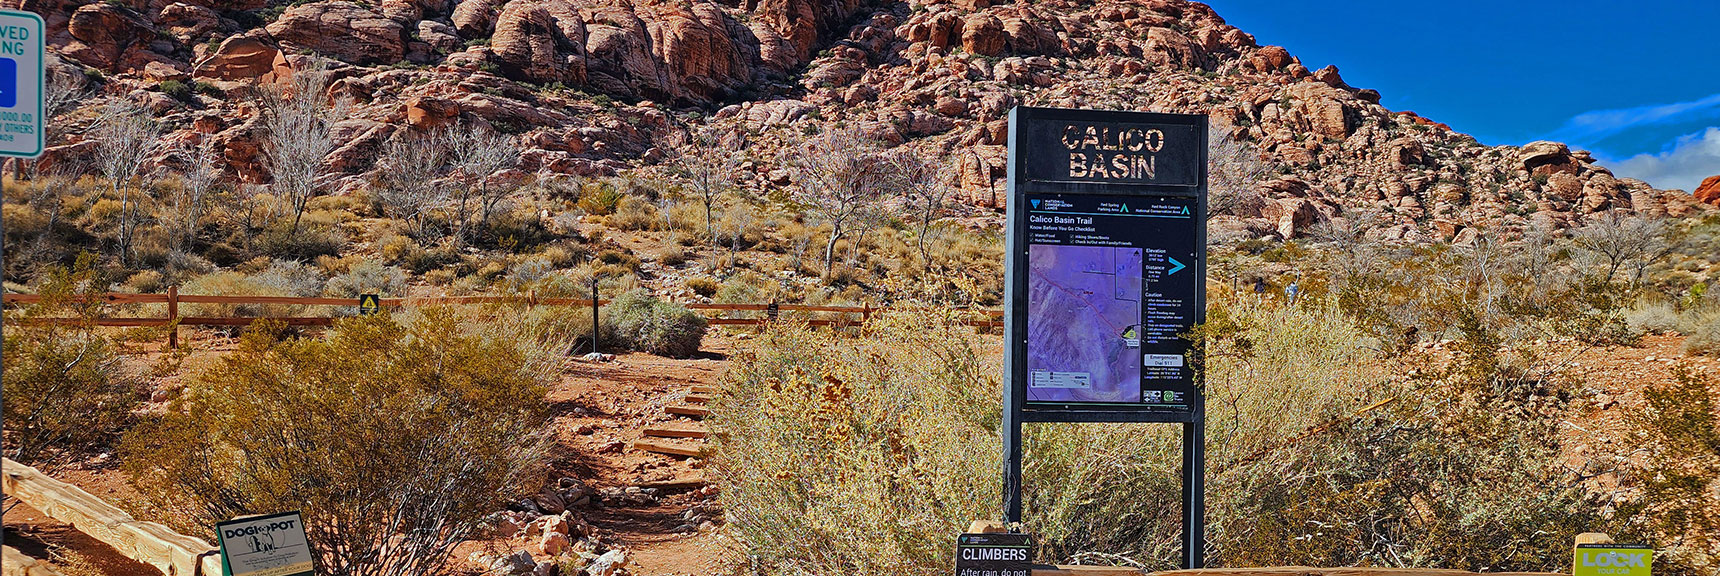 Turn Left at the Base of the Boardwalk for the Calico Basin Trail | Calico Basin Daily Workout Trails | Calico Basin, Nevada